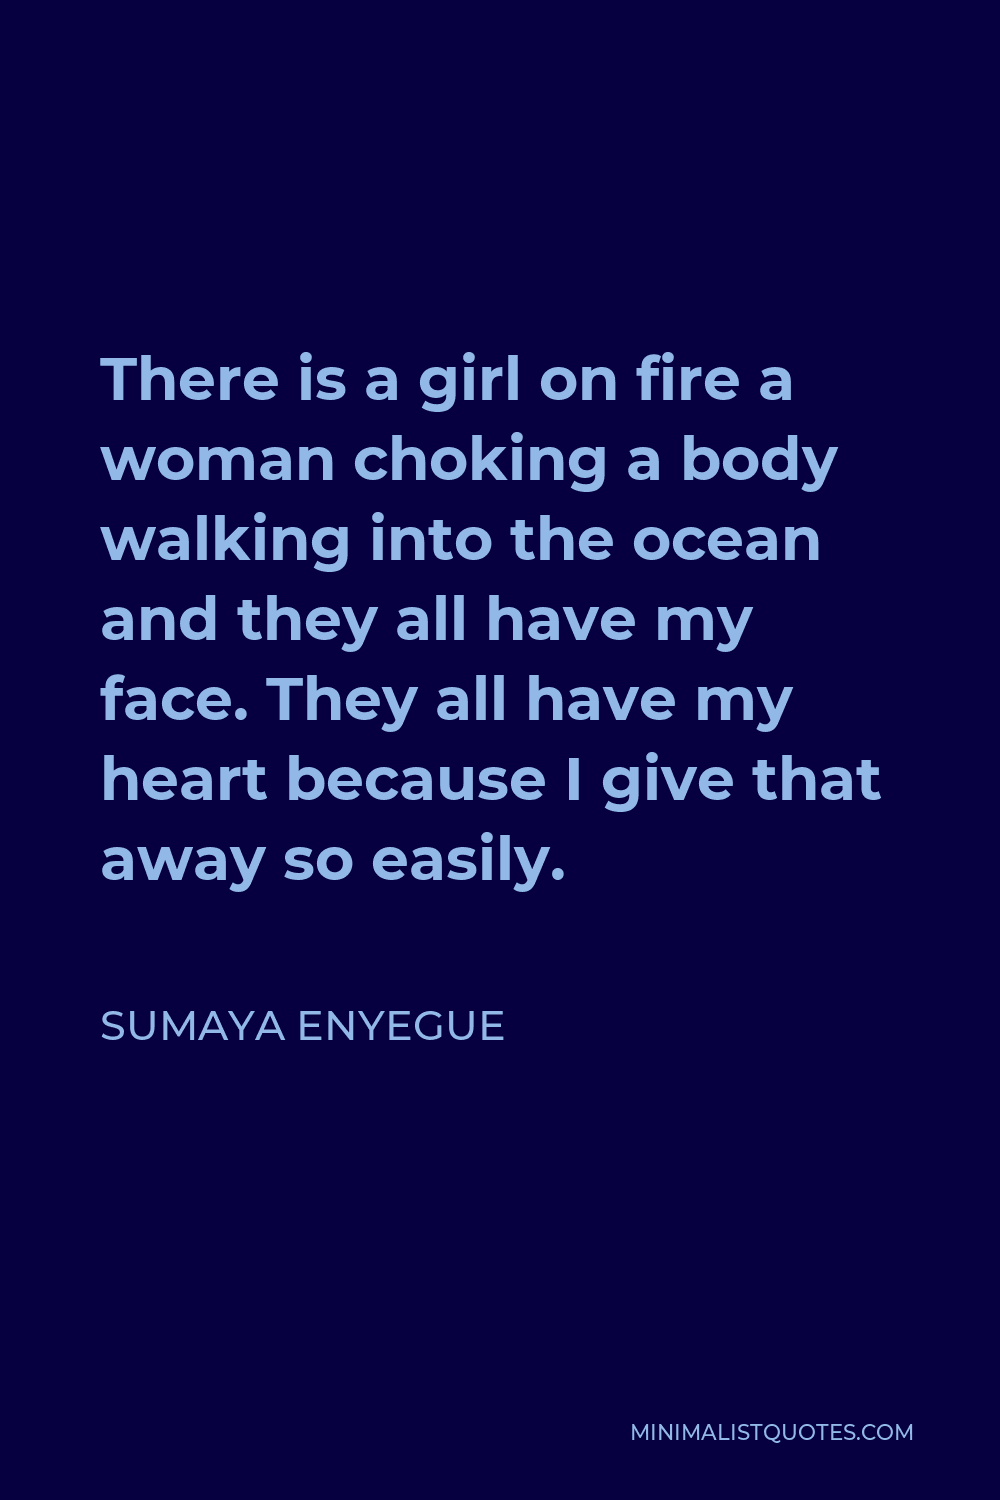 Sumaya Enyegue Quote - There is a girl on fire a woman choking a body walking into the ocean and they all have my face. They all have my heart because I give that away so easily.